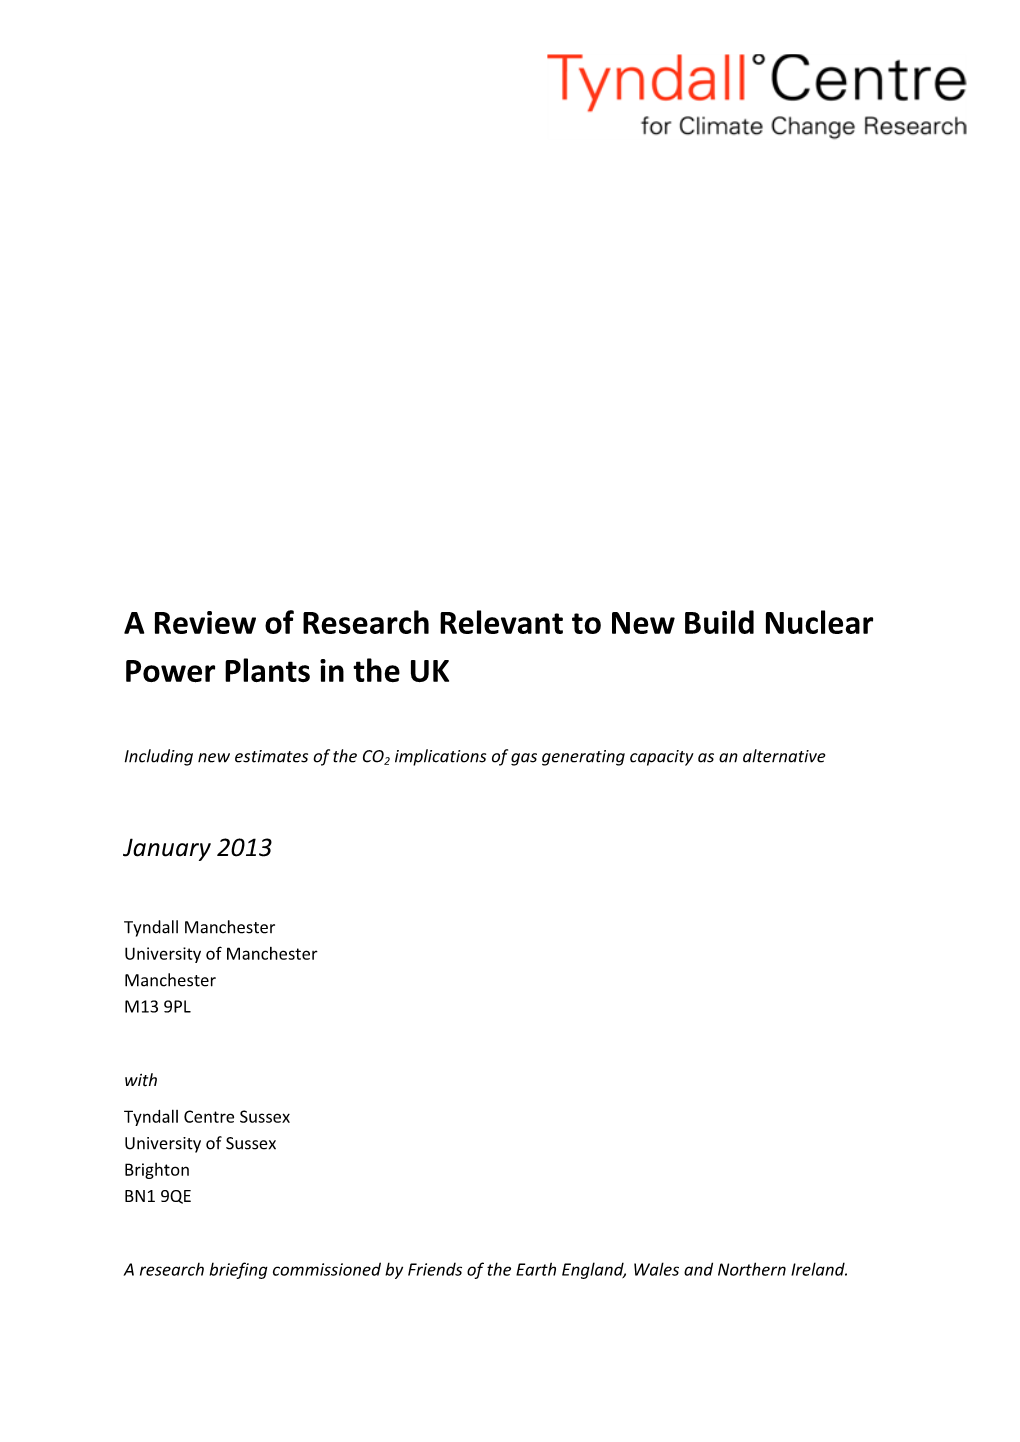 A Review of Research Relevant to New Build Nuclear Power Plants in the UK